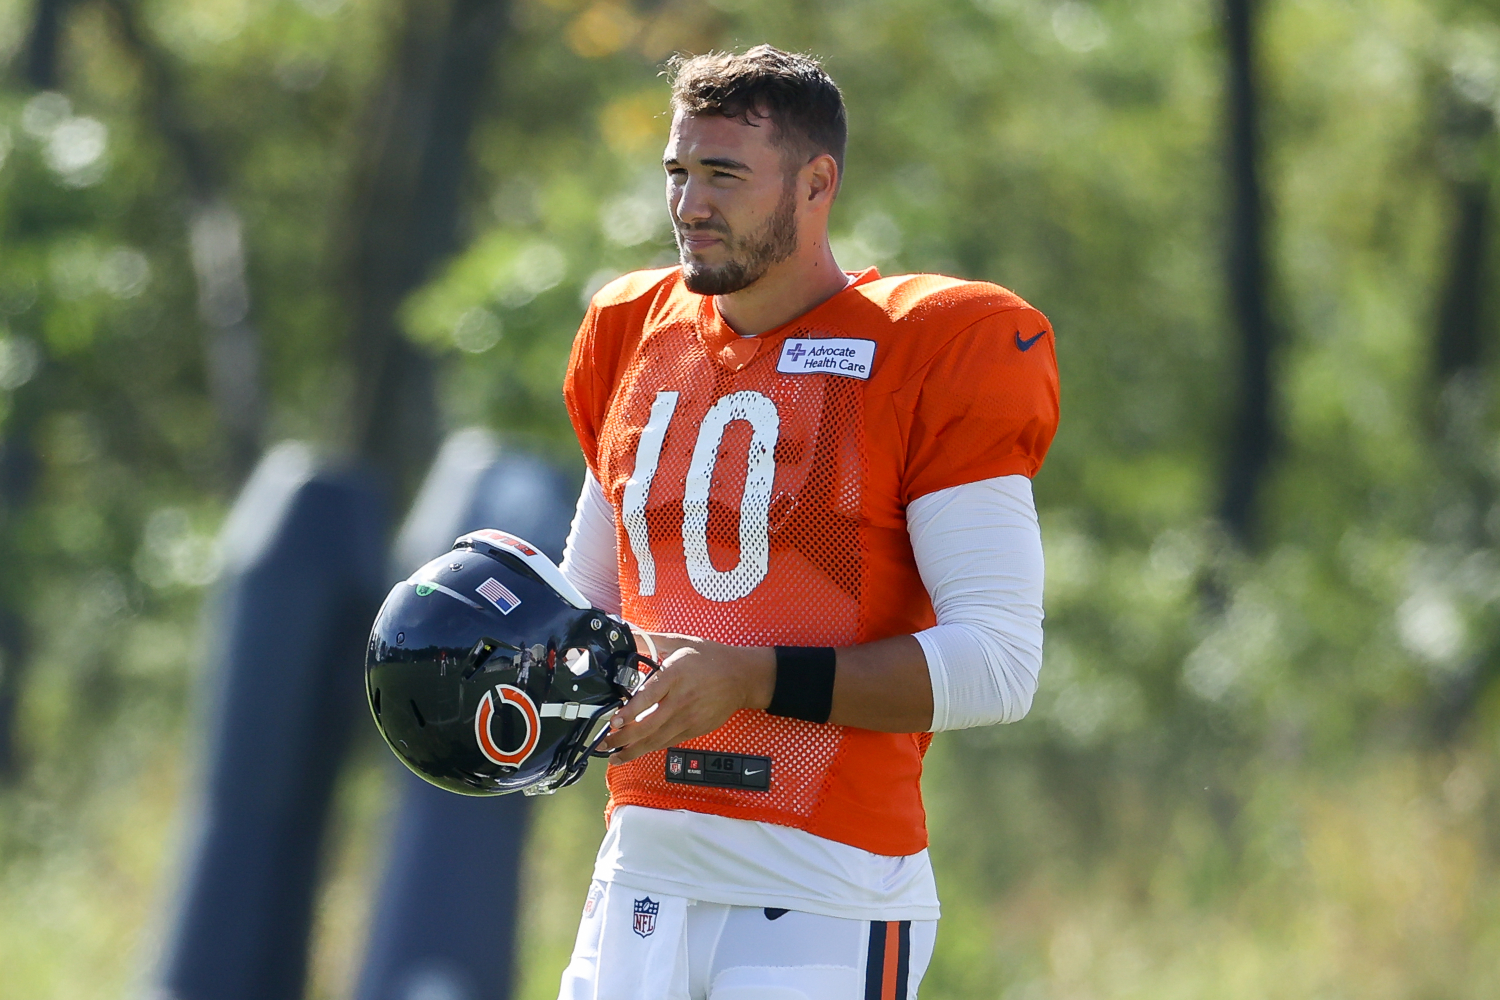 Tony Dungy had a surprising comment about Mitchell Trubisky